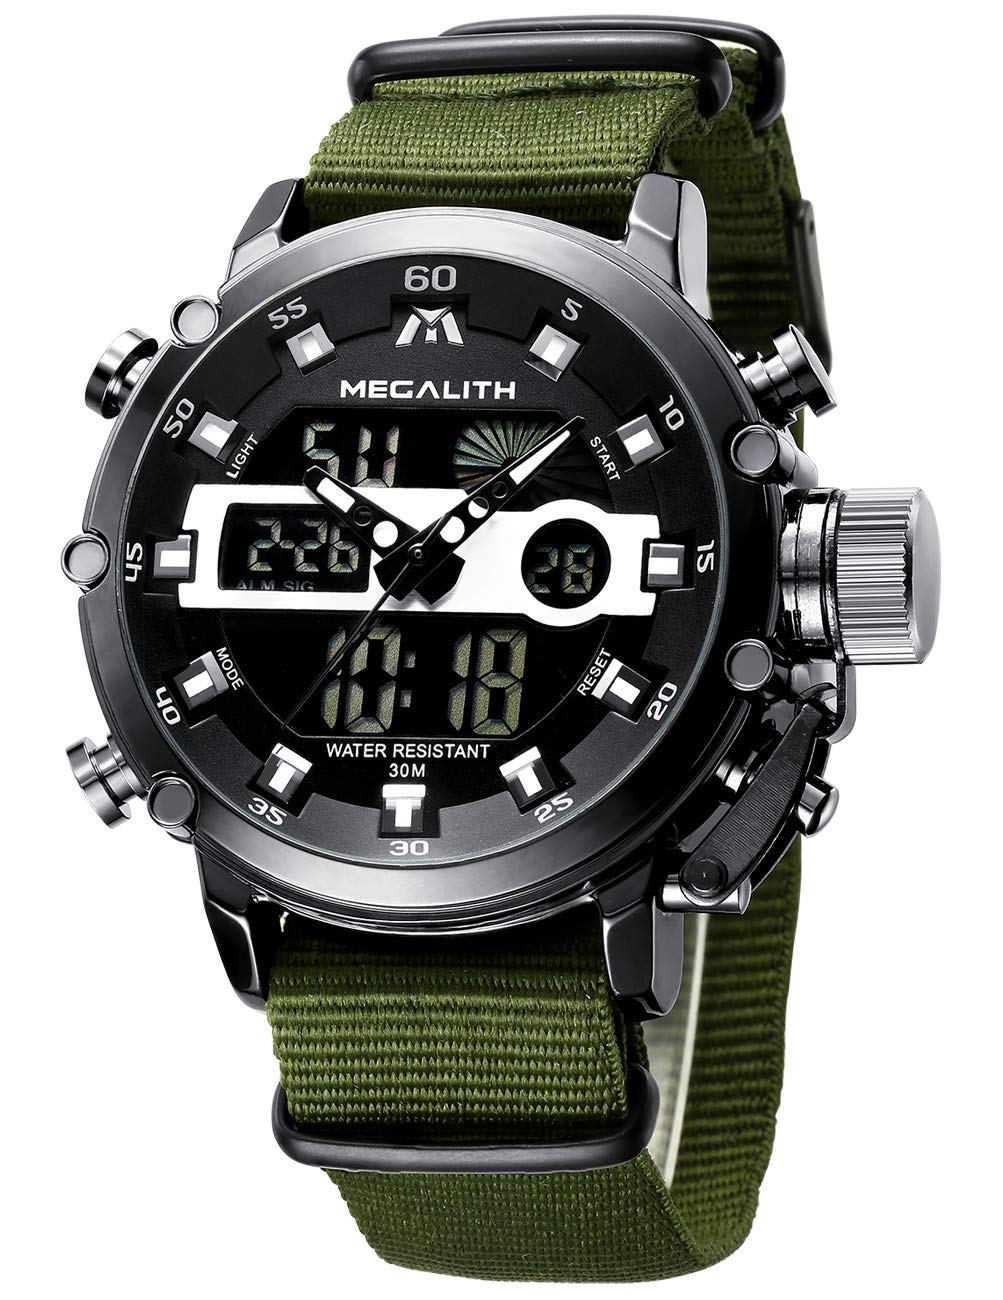 MEGALITH Mens Watches Waterproof Digital Military Sport Tactical Multifunction Heavy Duty Led Digial Watch for Men, Alarm Stopwatch, Nylon/Leather Strap